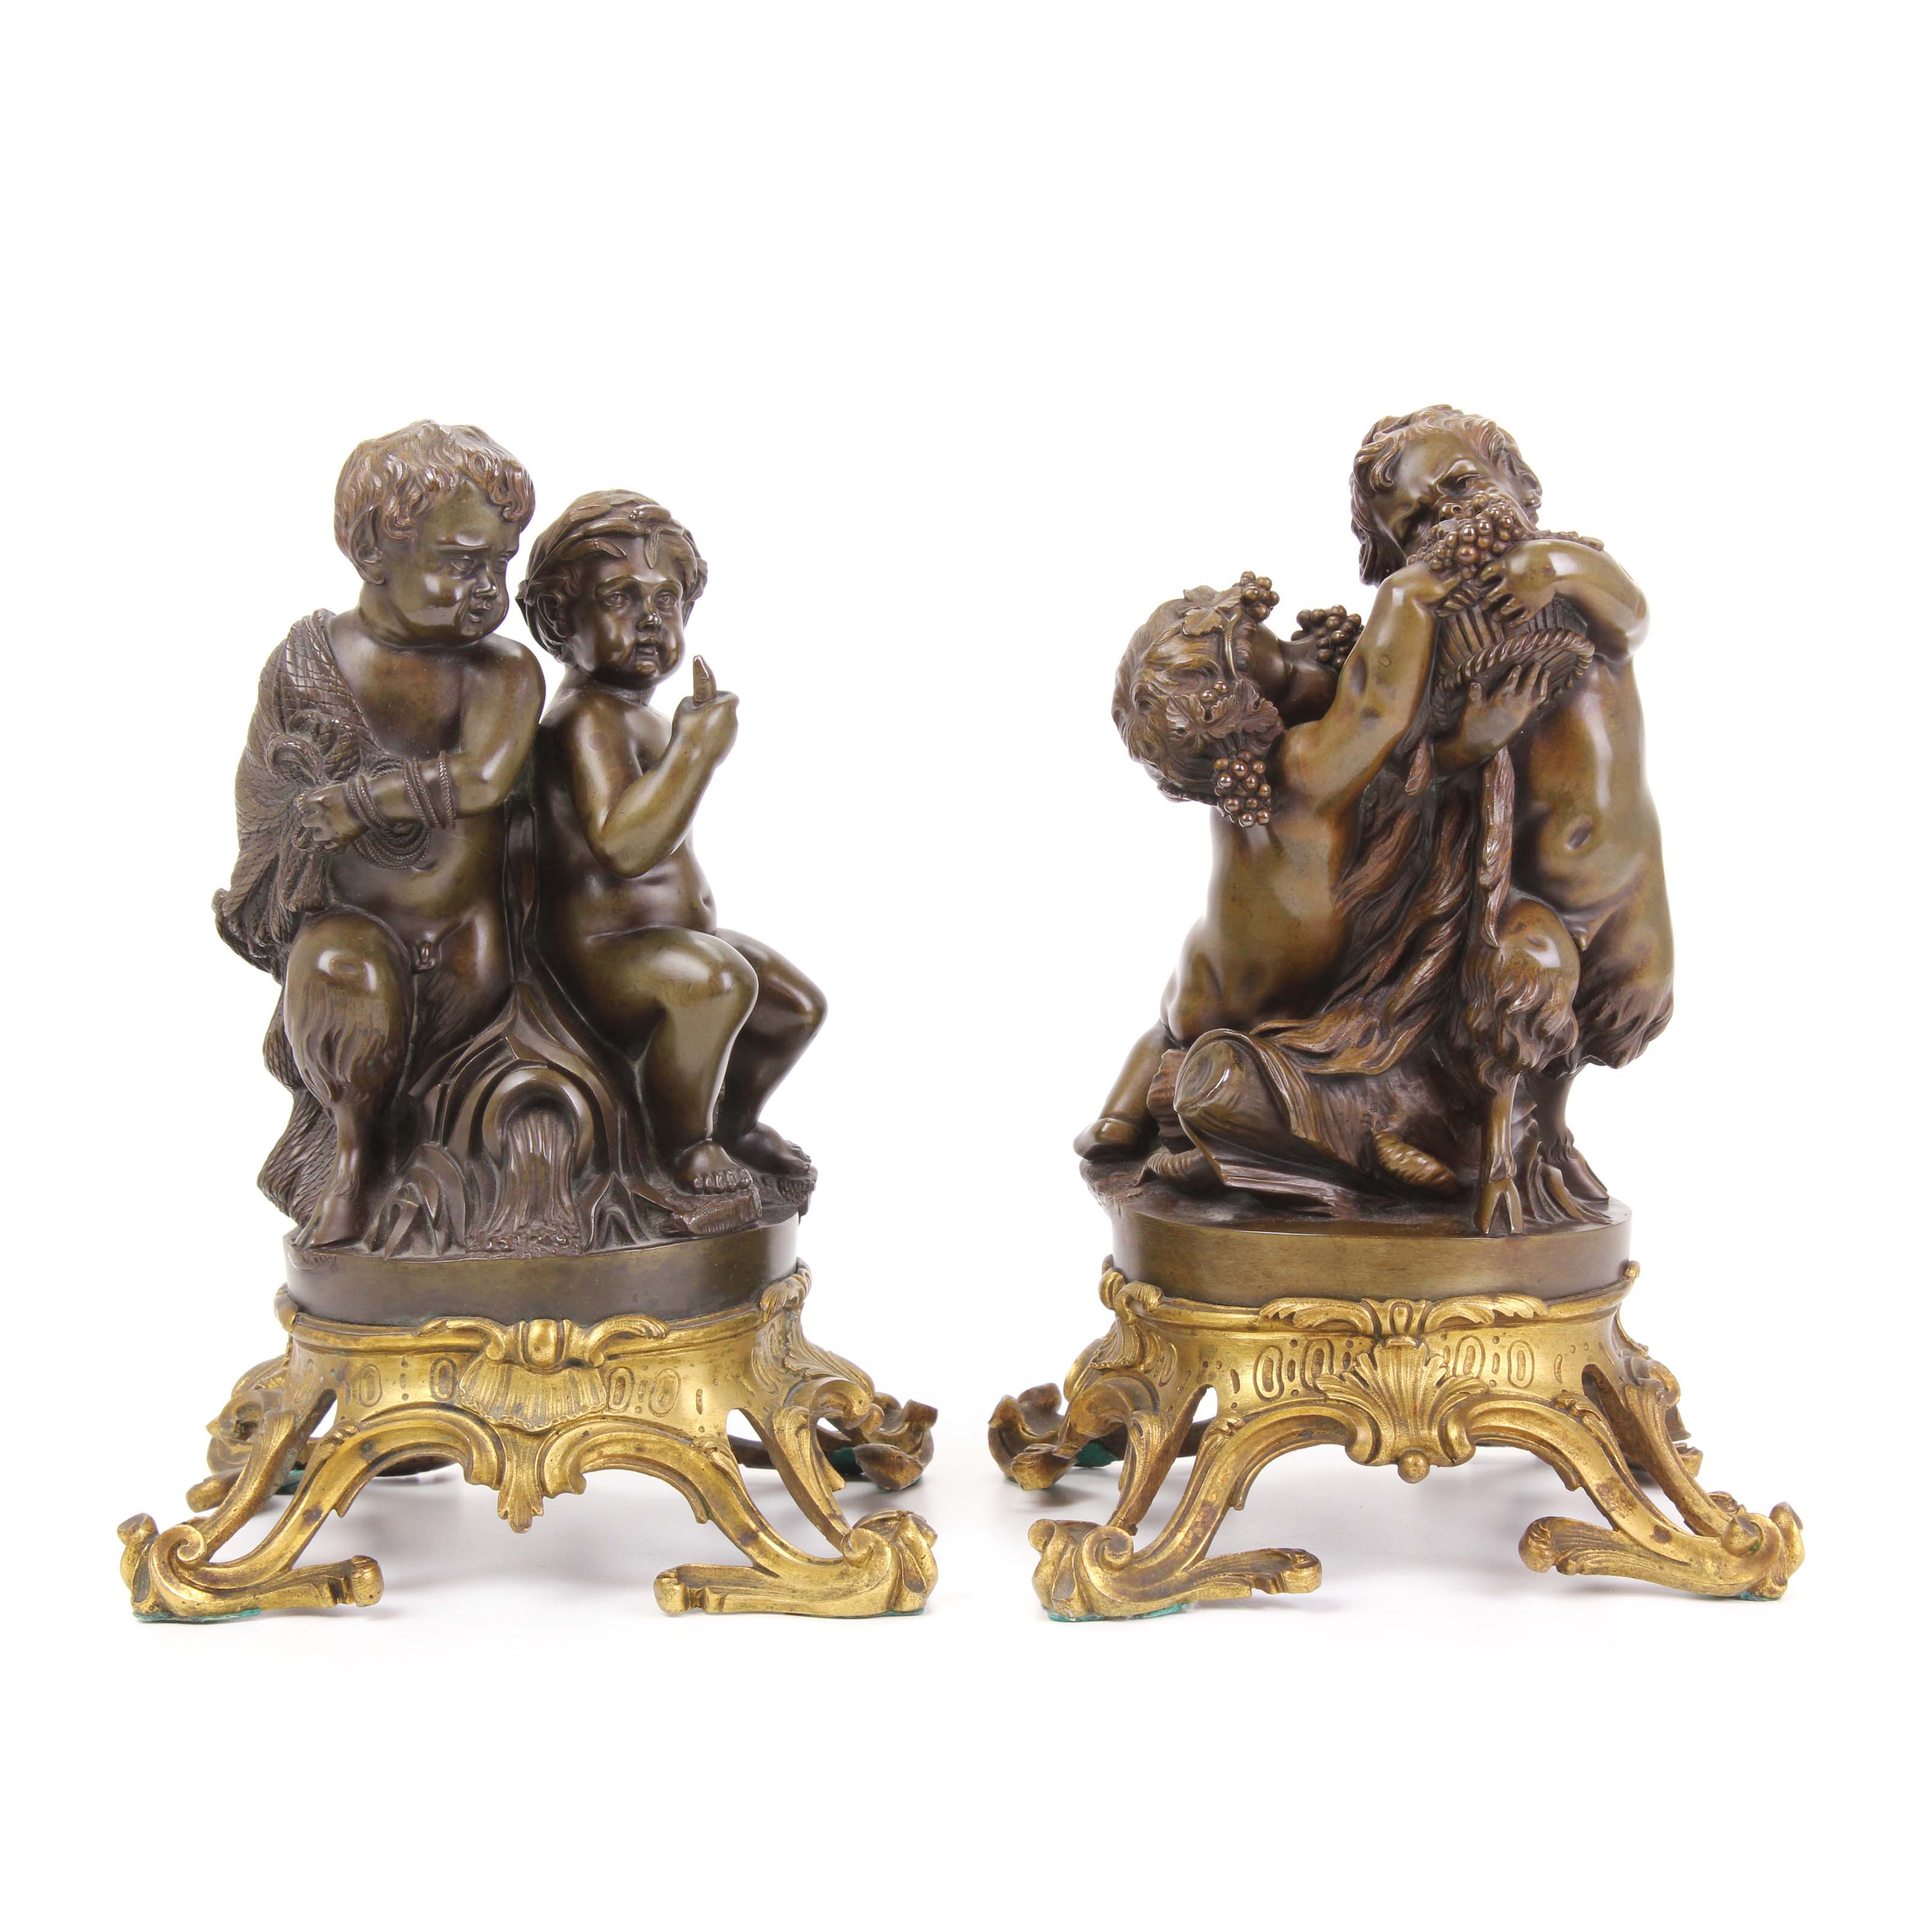 PROBABLY FRENCH SCHOOL, C 20th. "SATYRS AND CHERUBS"